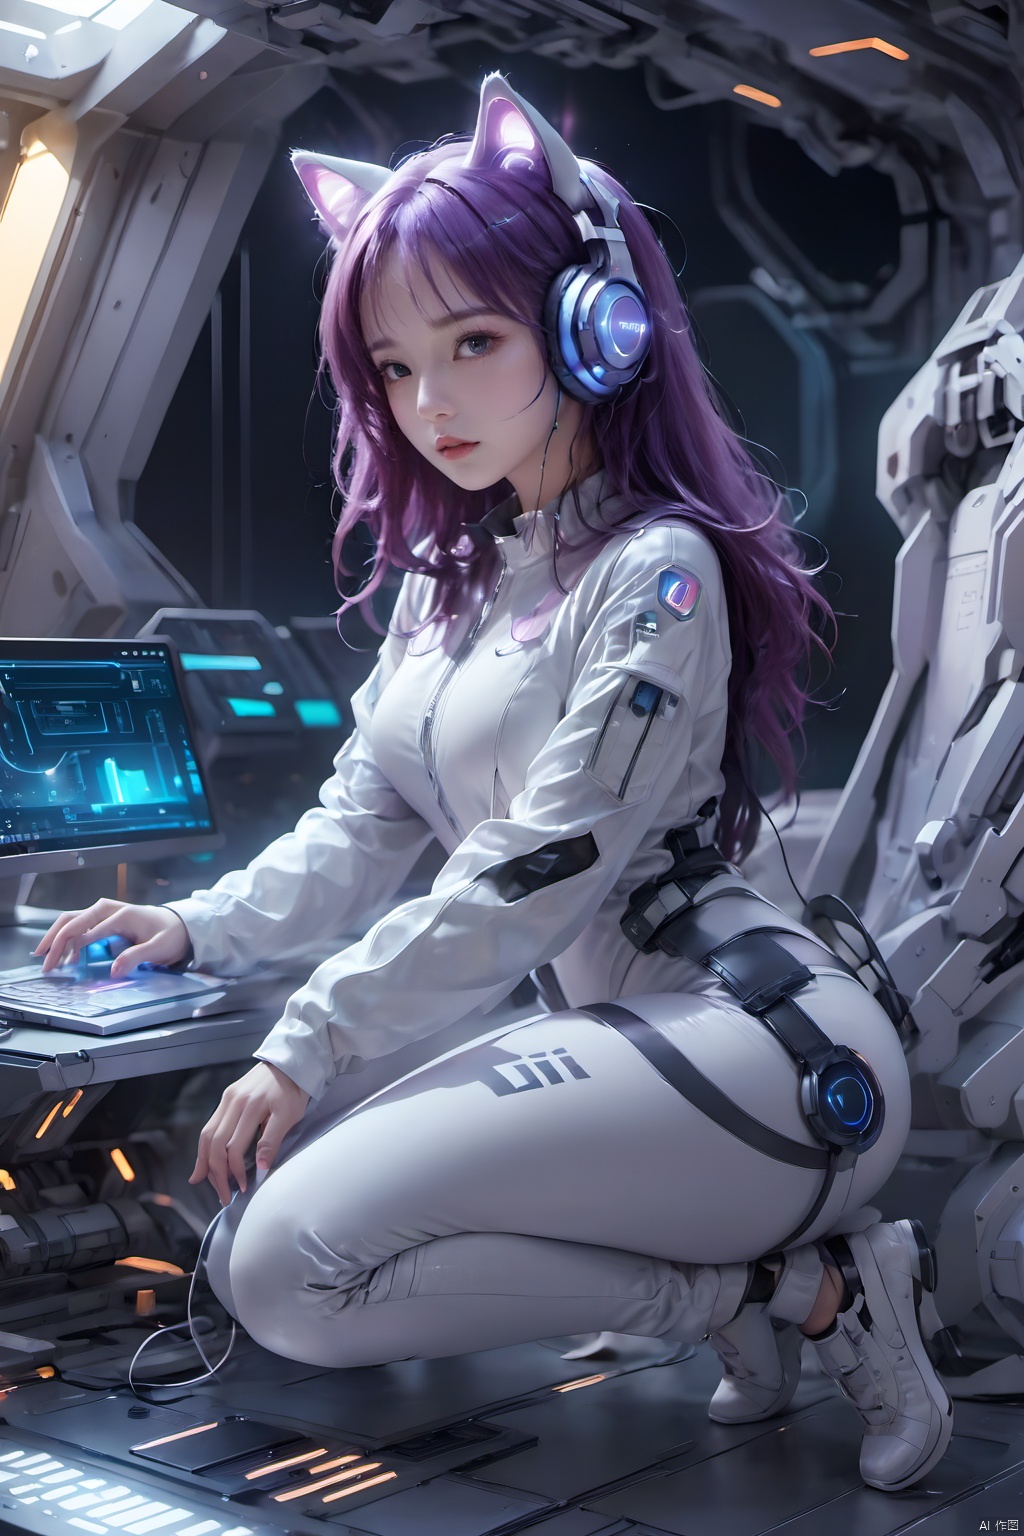 1girl,Future style gel coat,Future Combat Suit,animal ears,bodysuit,breasts,cat ear headphones,computer,hand on headphones,Glowing Clothing,Future Technology Space Station,full body,Sitting posture,Clothing with multiple light sources,headphones,headset,laptop,long hair,looking at viewer,motor vehicle,robot ears,science fiction,sitting,solo,Purple hair, glow,